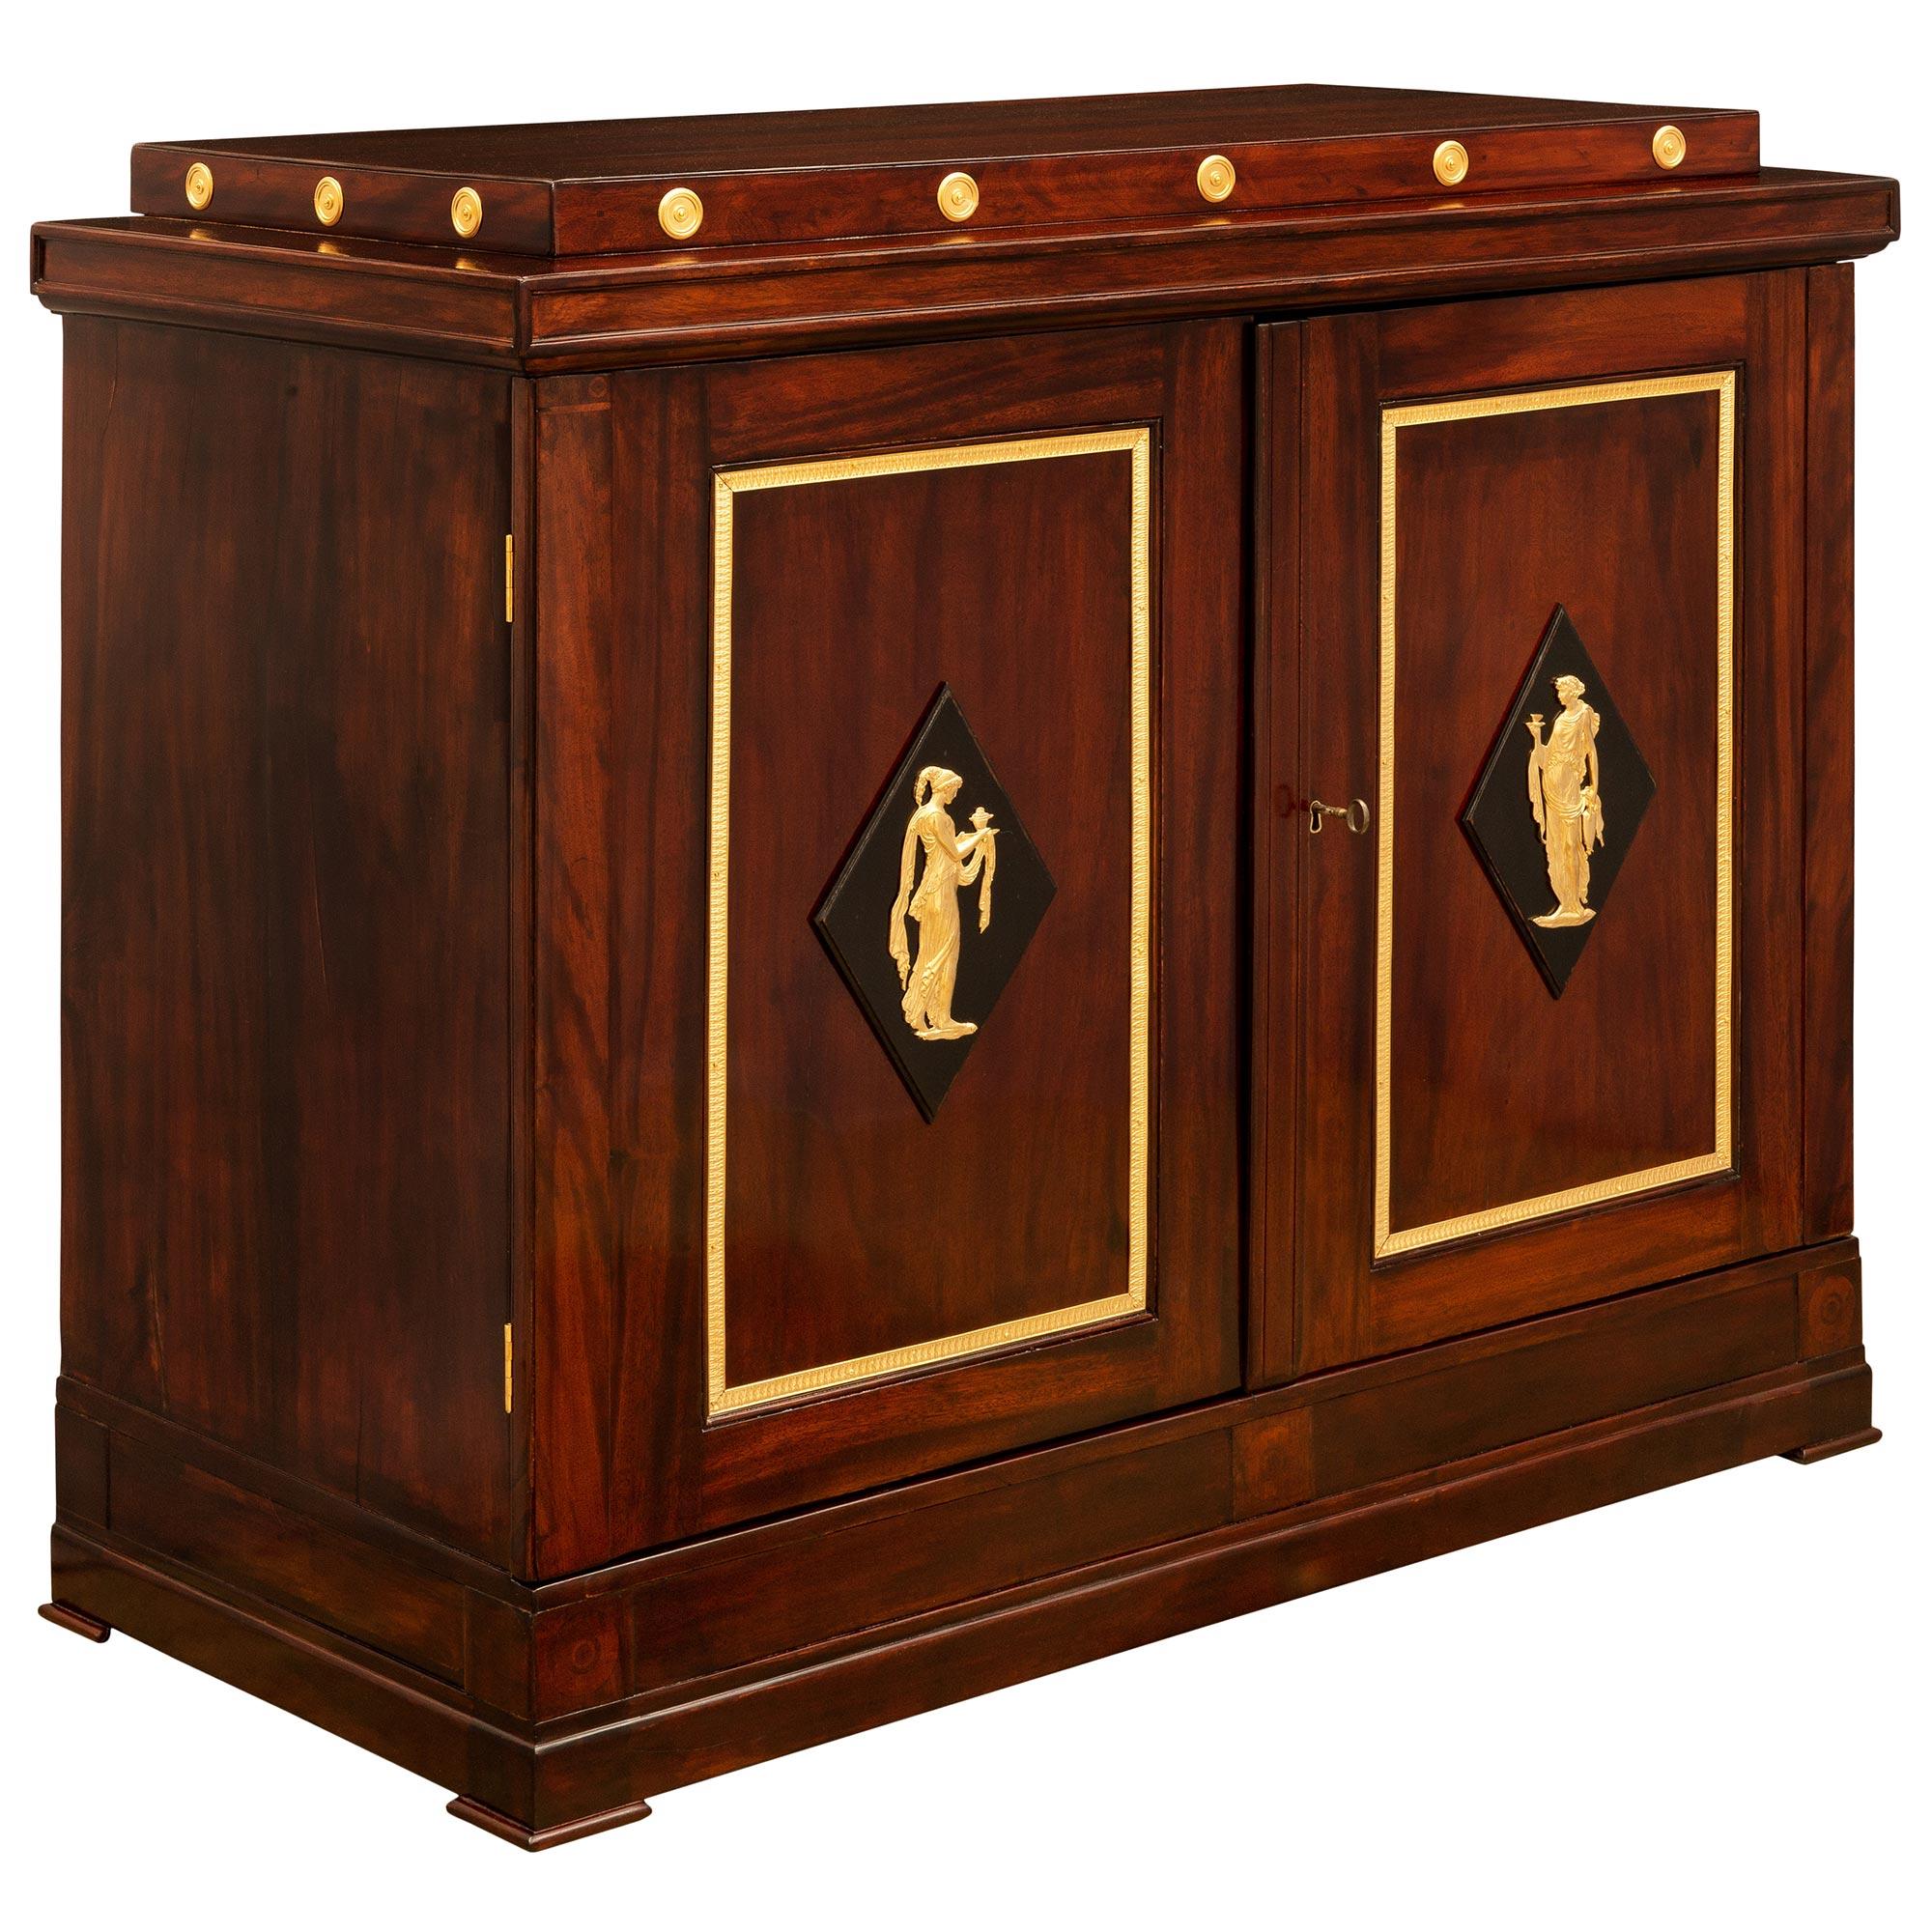 Russian 19th Century 1st Empire Period Mahogany, Ebony and Ormolu Cabinet In Good Condition For Sale In West Palm Beach, FL